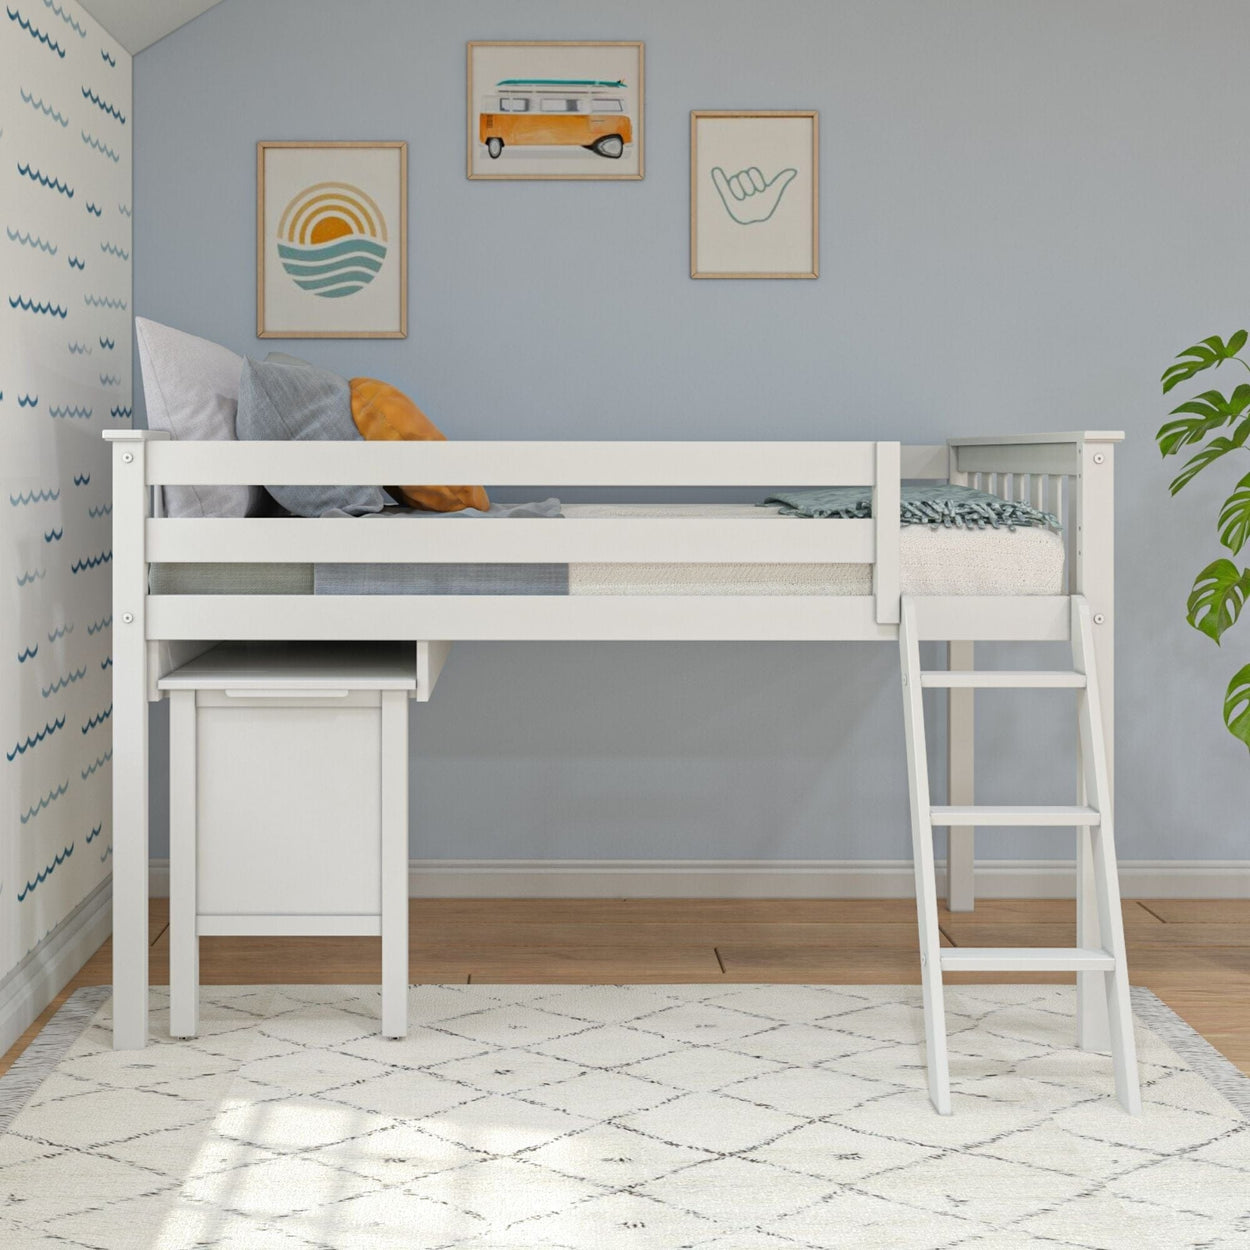 185212-002 : Loft Beds Twin-Size Low Loft with Pull-Out Desk, White